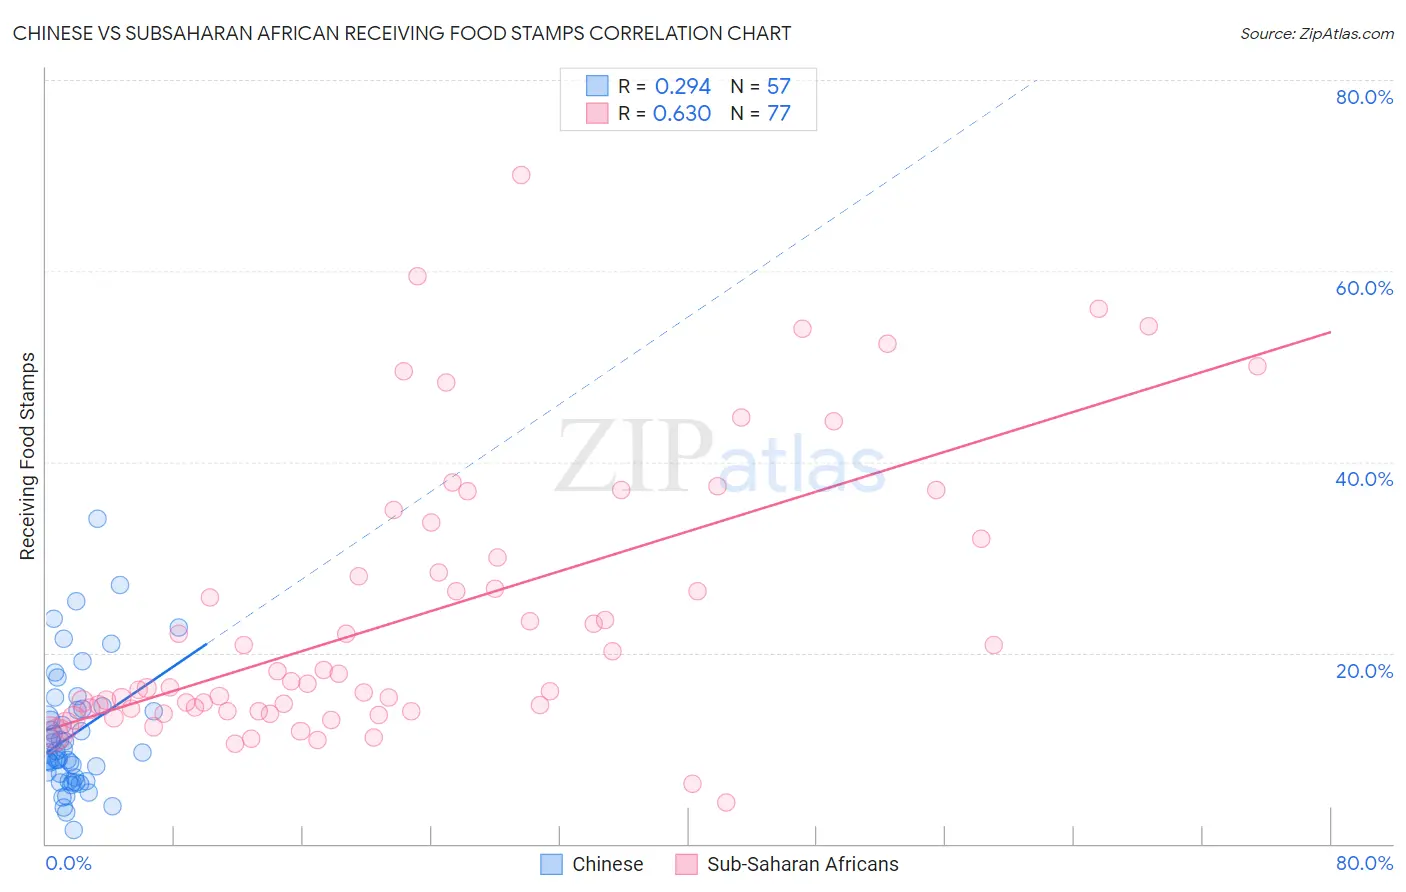 Chinese vs Subsaharan African Receiving Food Stamps